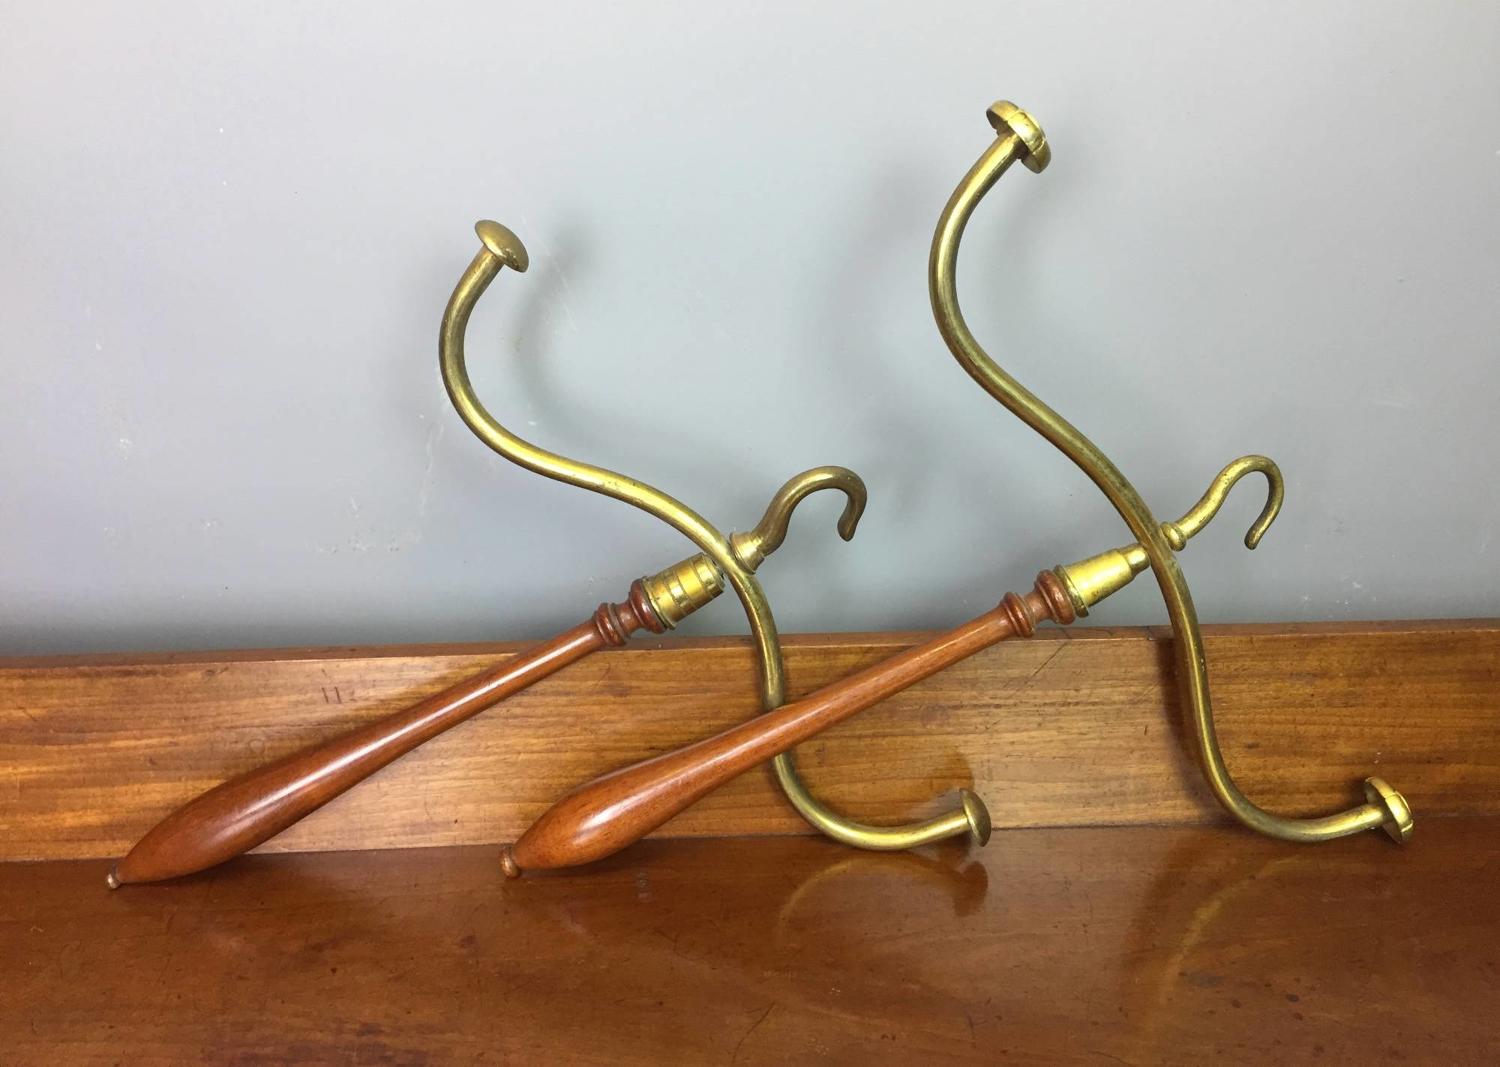 A Near Matching Pair of Barrister's Wig & Gown Hangers